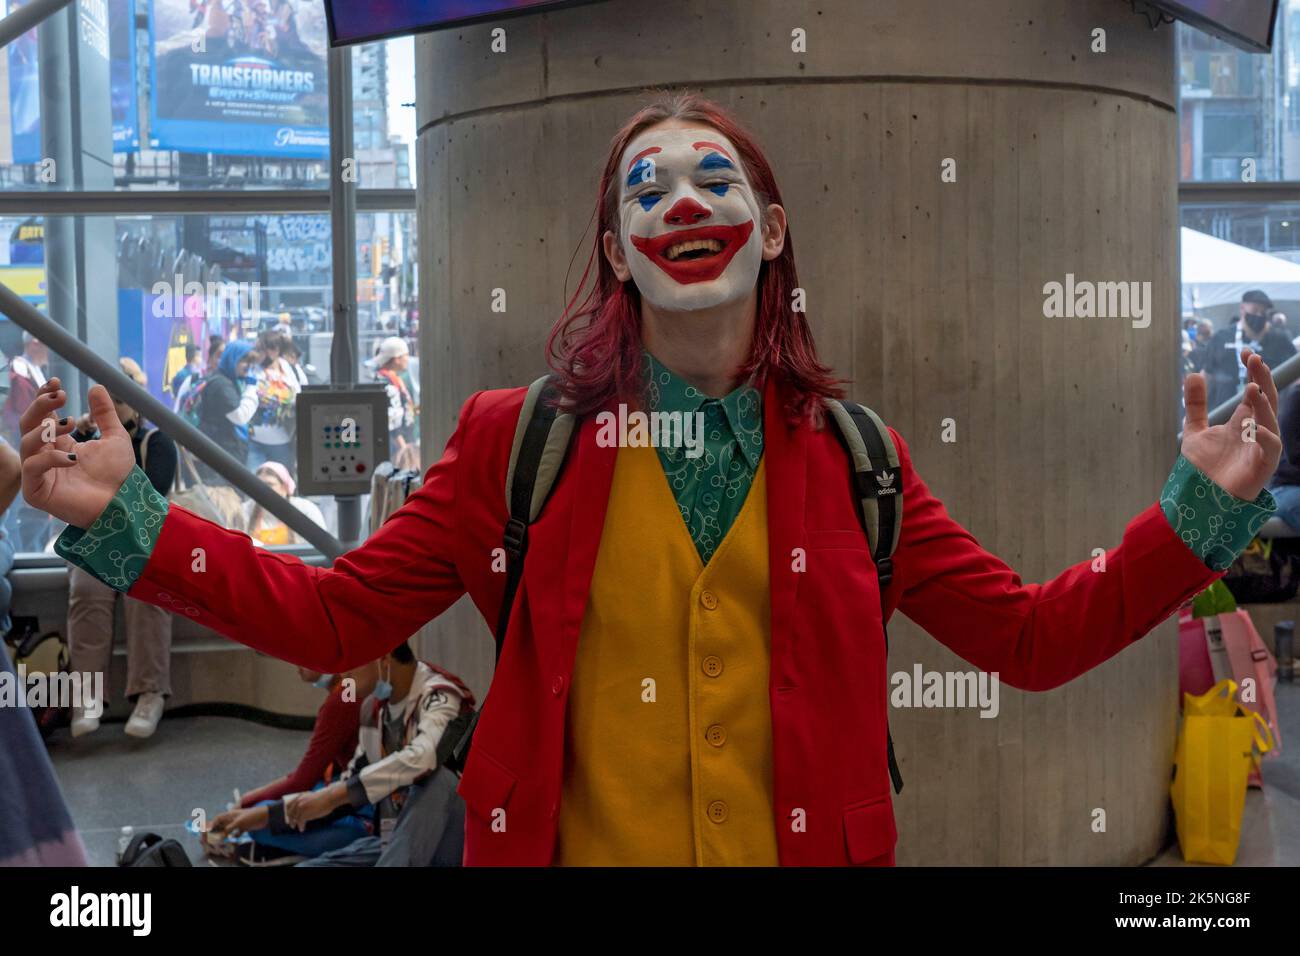 New York, United States. 08th Oct, 2022. A cosplayer dressed as The Joker poses during New York Comic Con 2022 at Jacob Javits Center in New York City. Credit: SOPA Images Limited/Alamy Live News Stock Photo